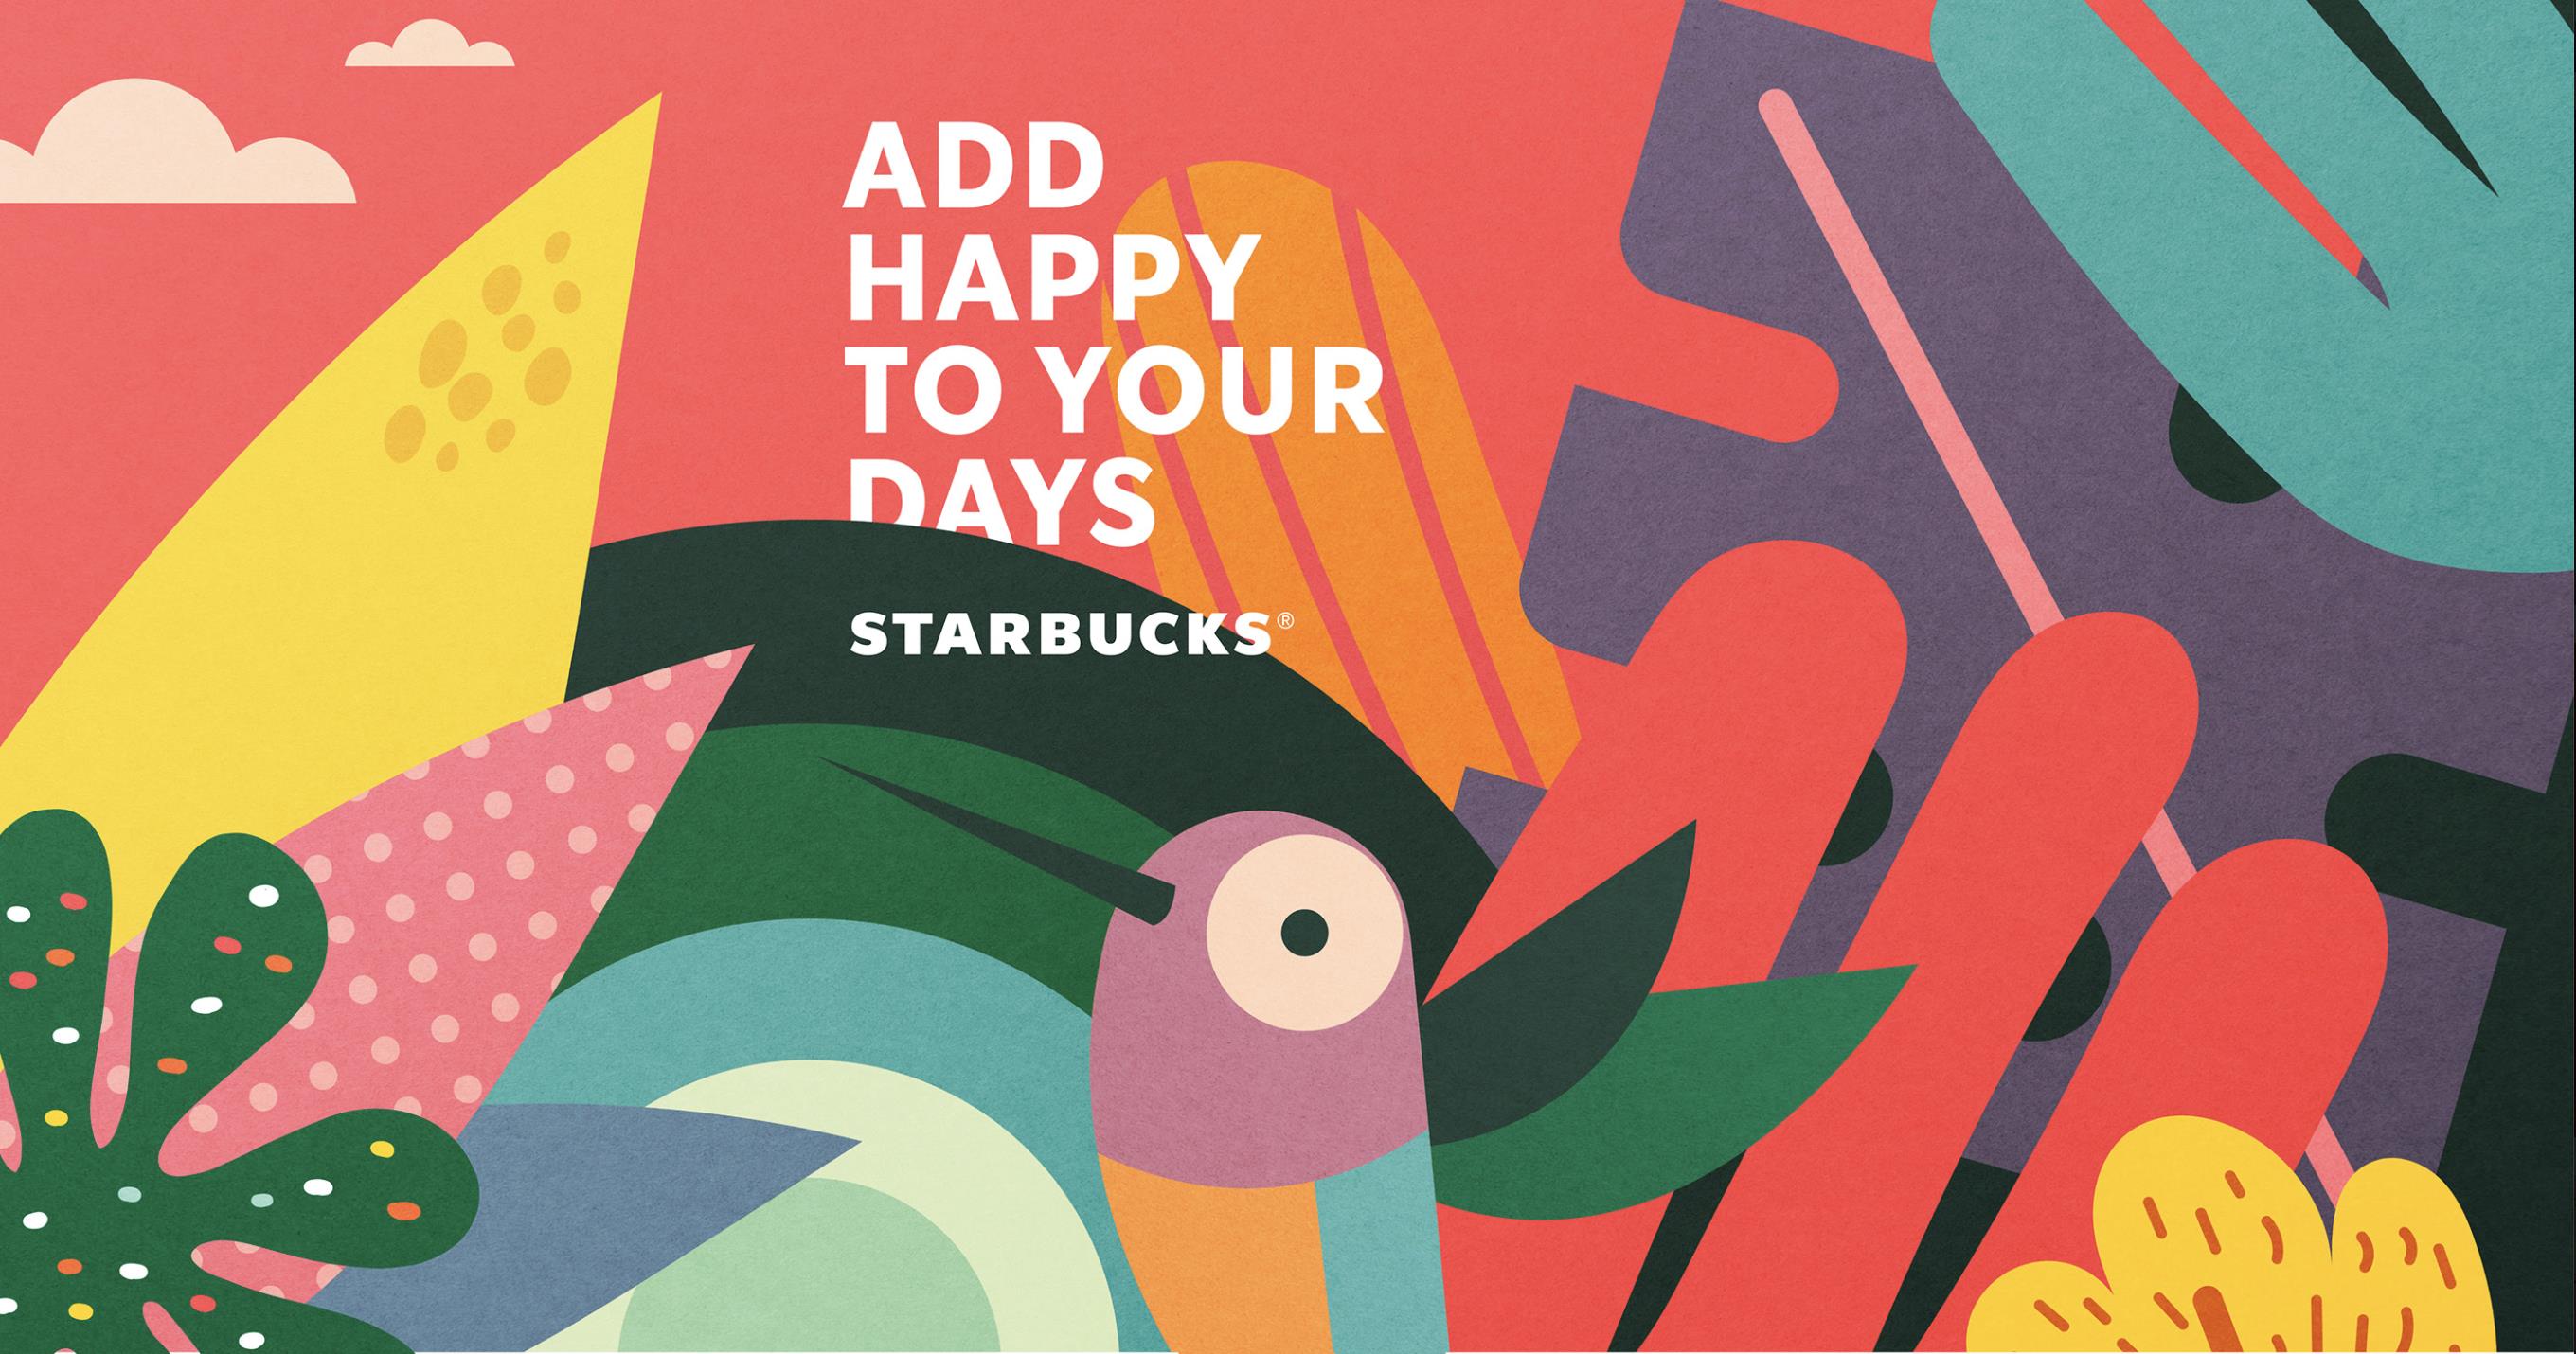 StarBucks - Add happy to your days - Creative toolkit 